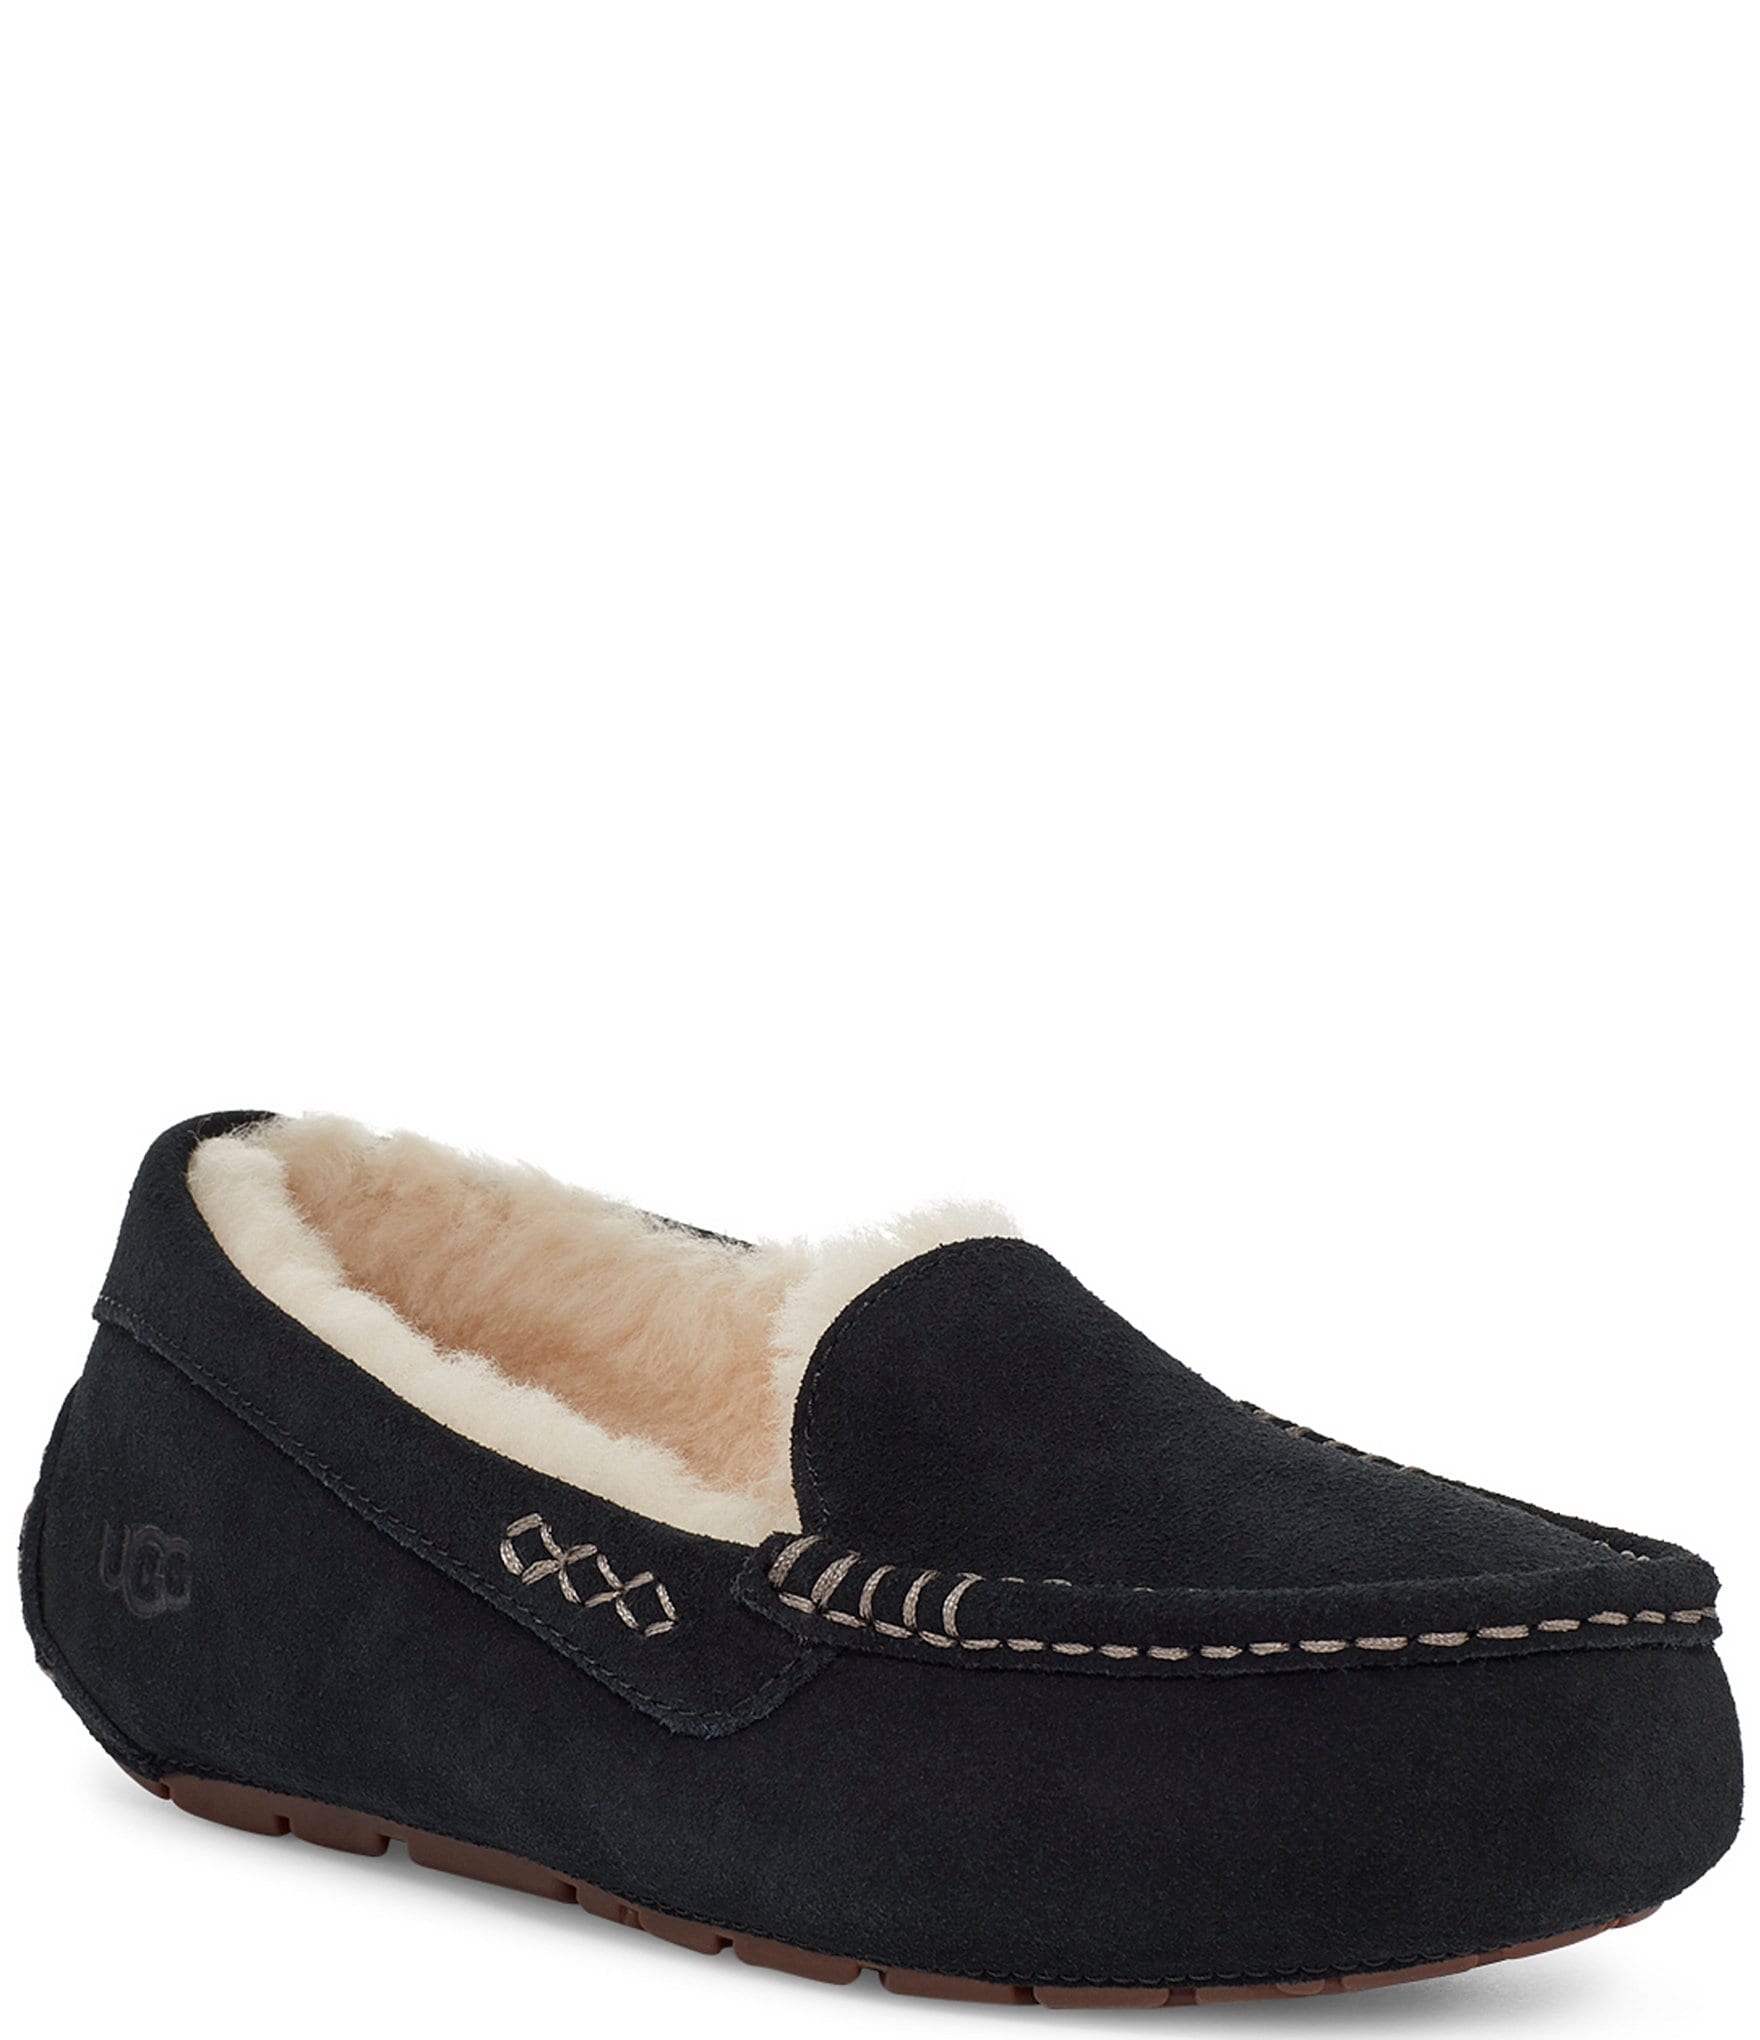 UGG Ansley Water-Resistant Suede Wool Lined Slippers | Dillard's